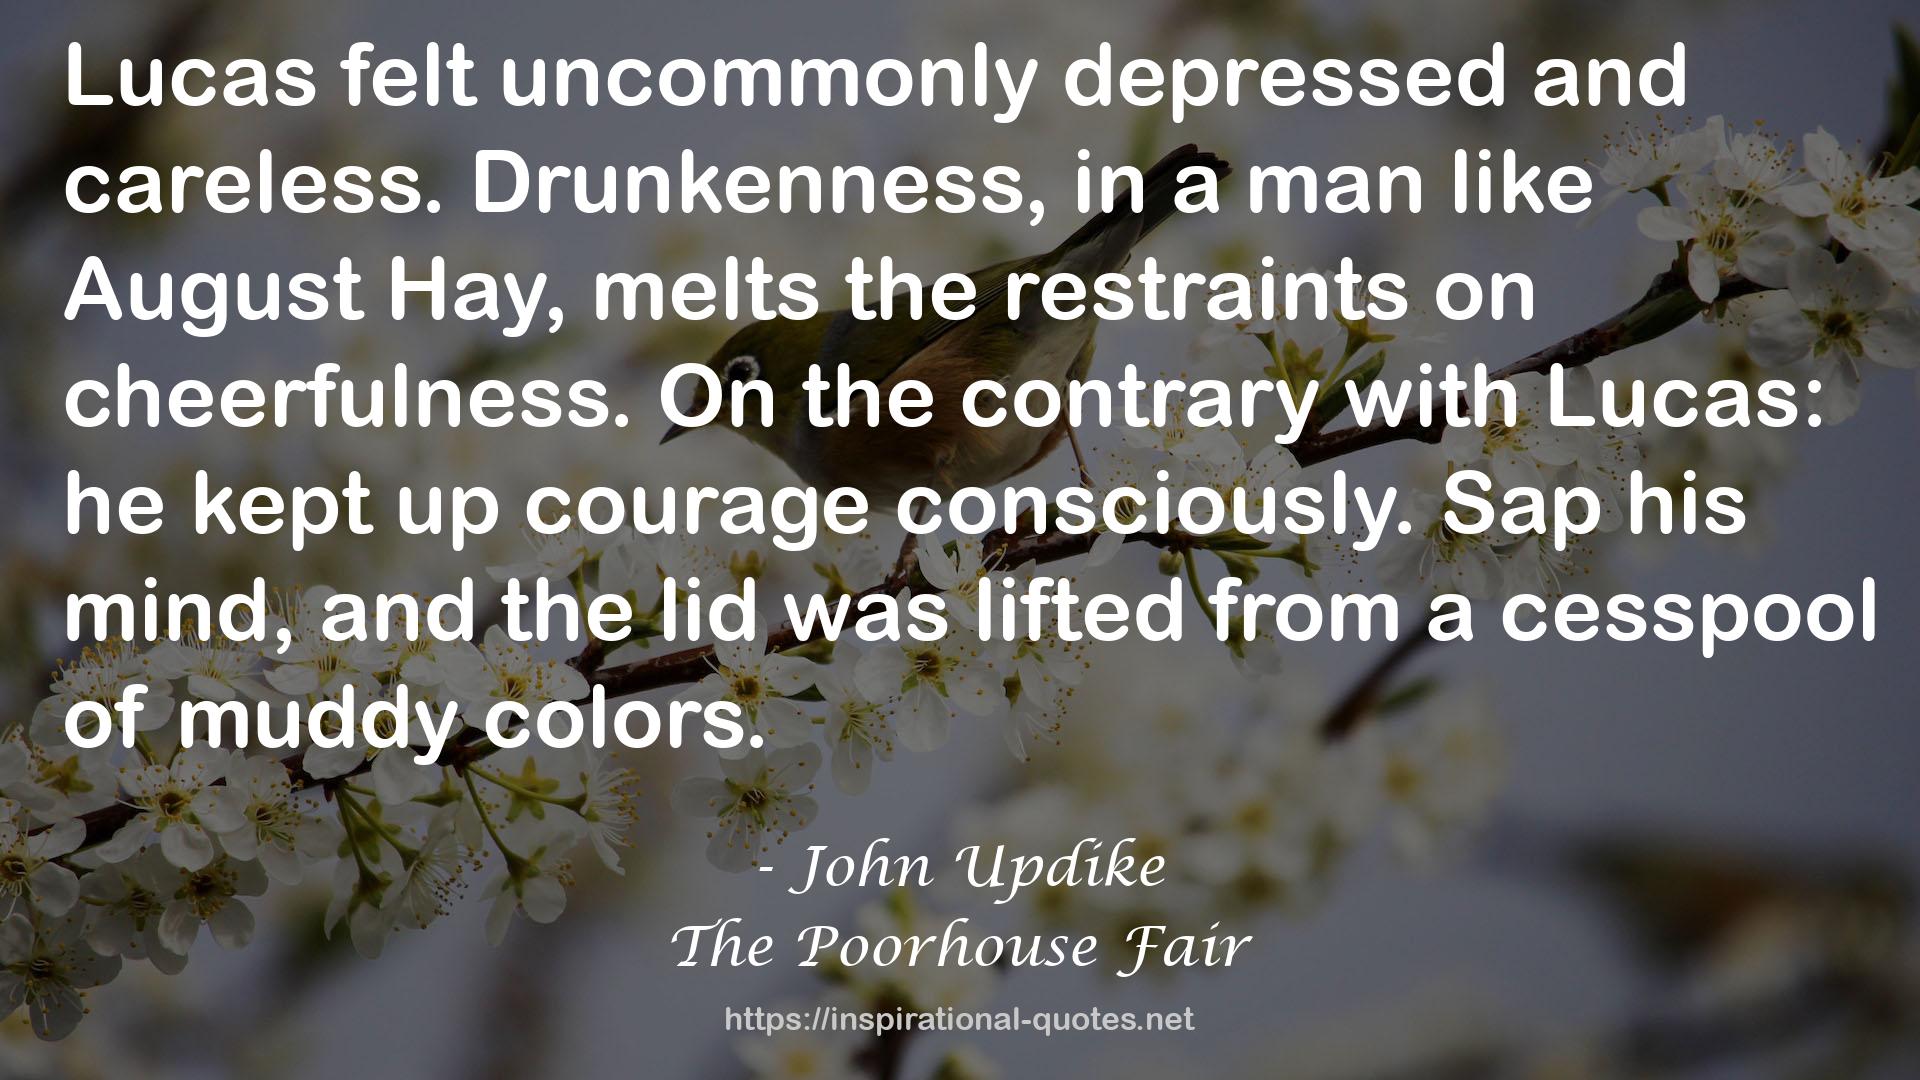 The Poorhouse Fair QUOTES